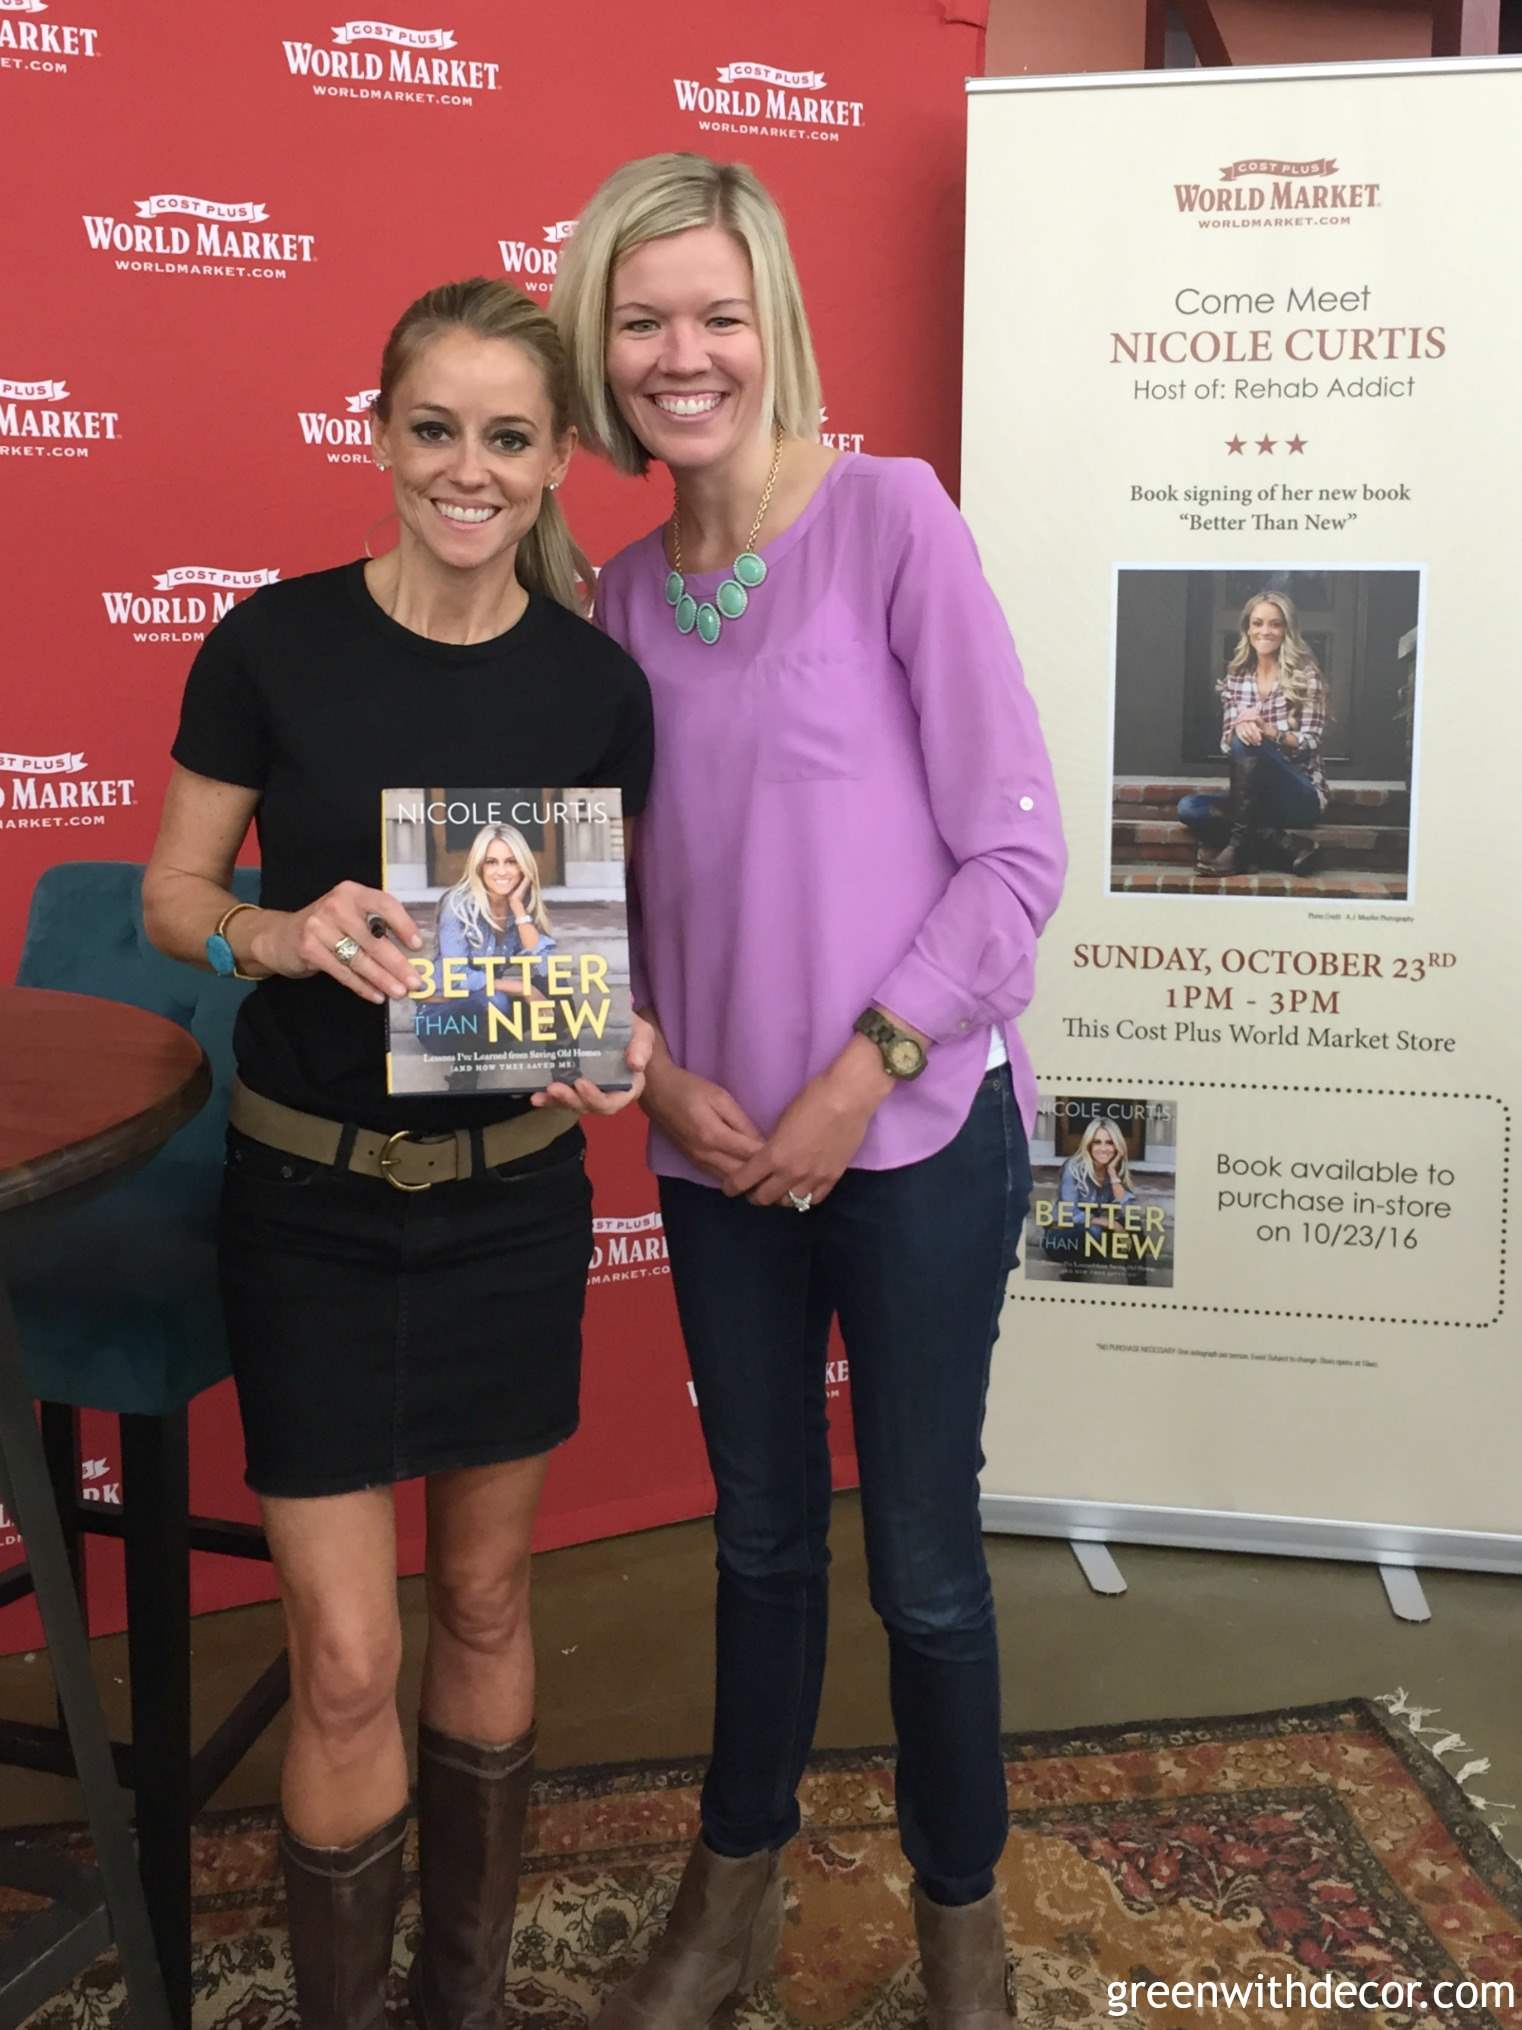 Meeting Nicole Curtis at a World Market store event!